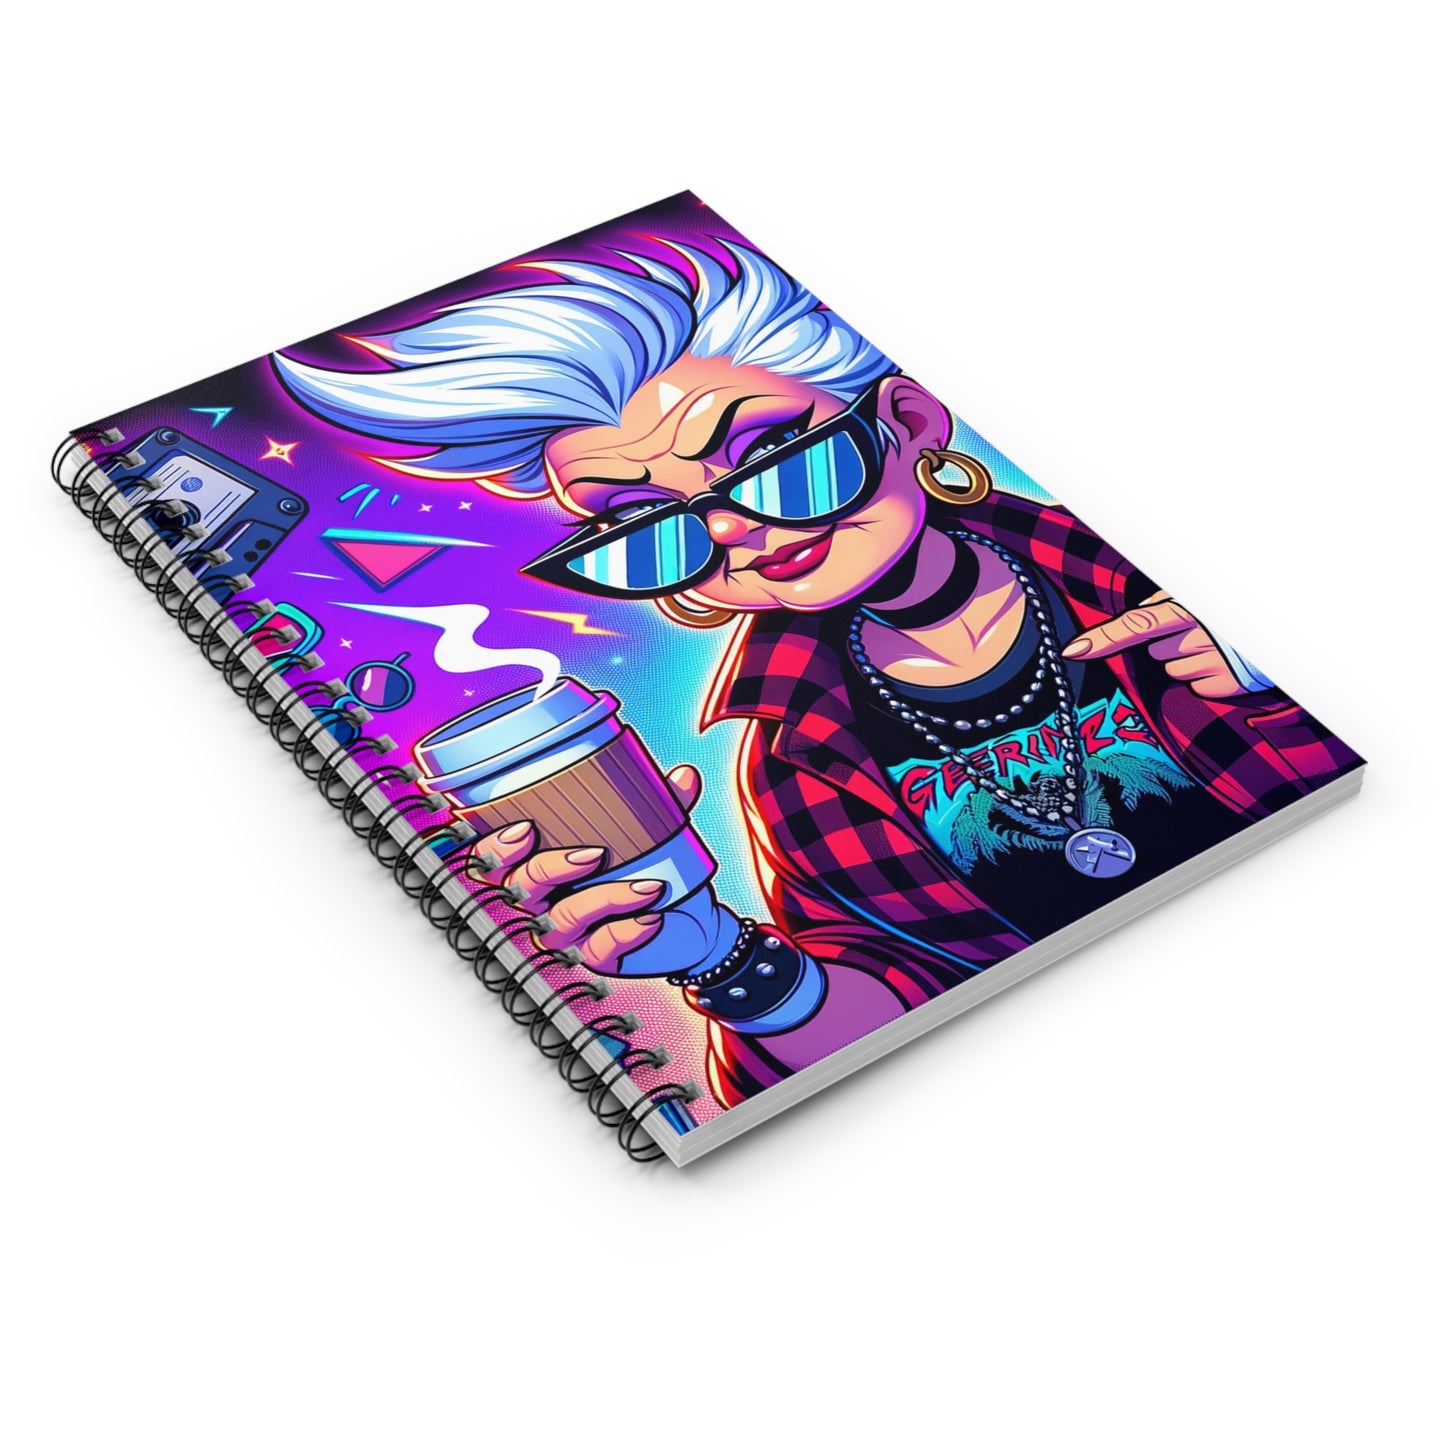 Gen X Woman Cartoon Notebook - Sarcastic Spiral Bound Ruled Lined Journal, 118 Pages, 6x8 inch Dark Humor Diary